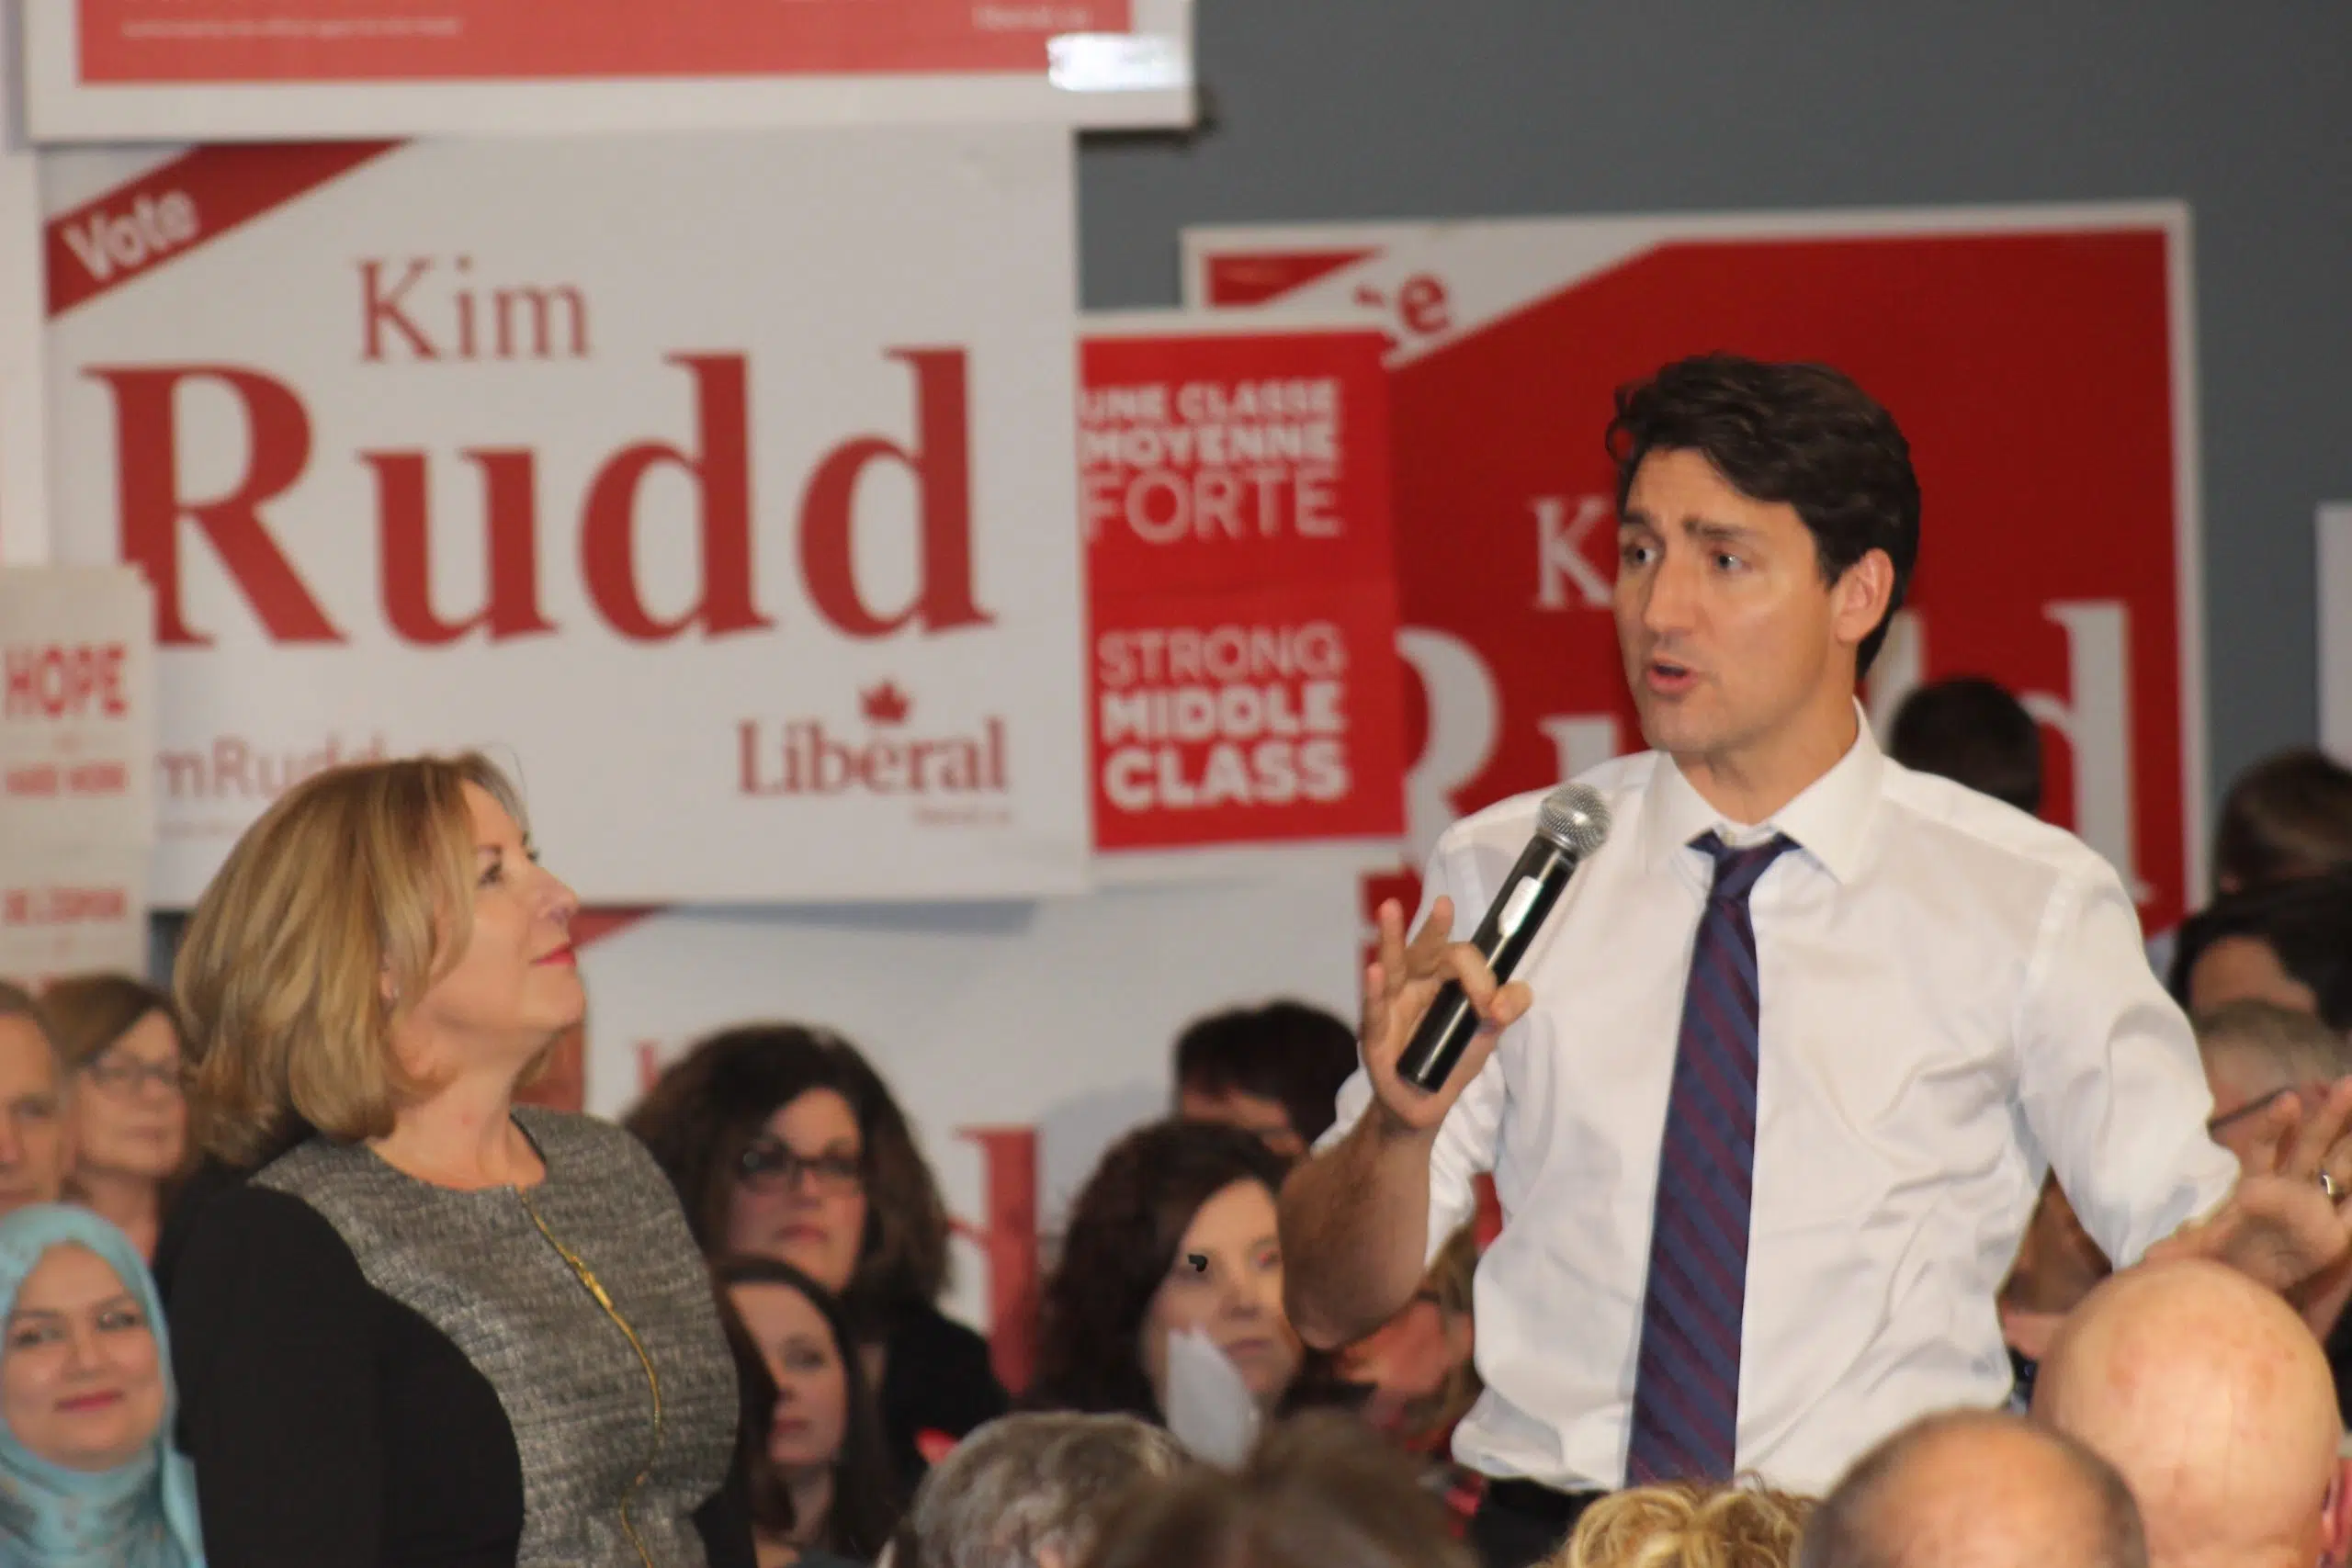 Full house for Justin Trudeau Cobourg visit